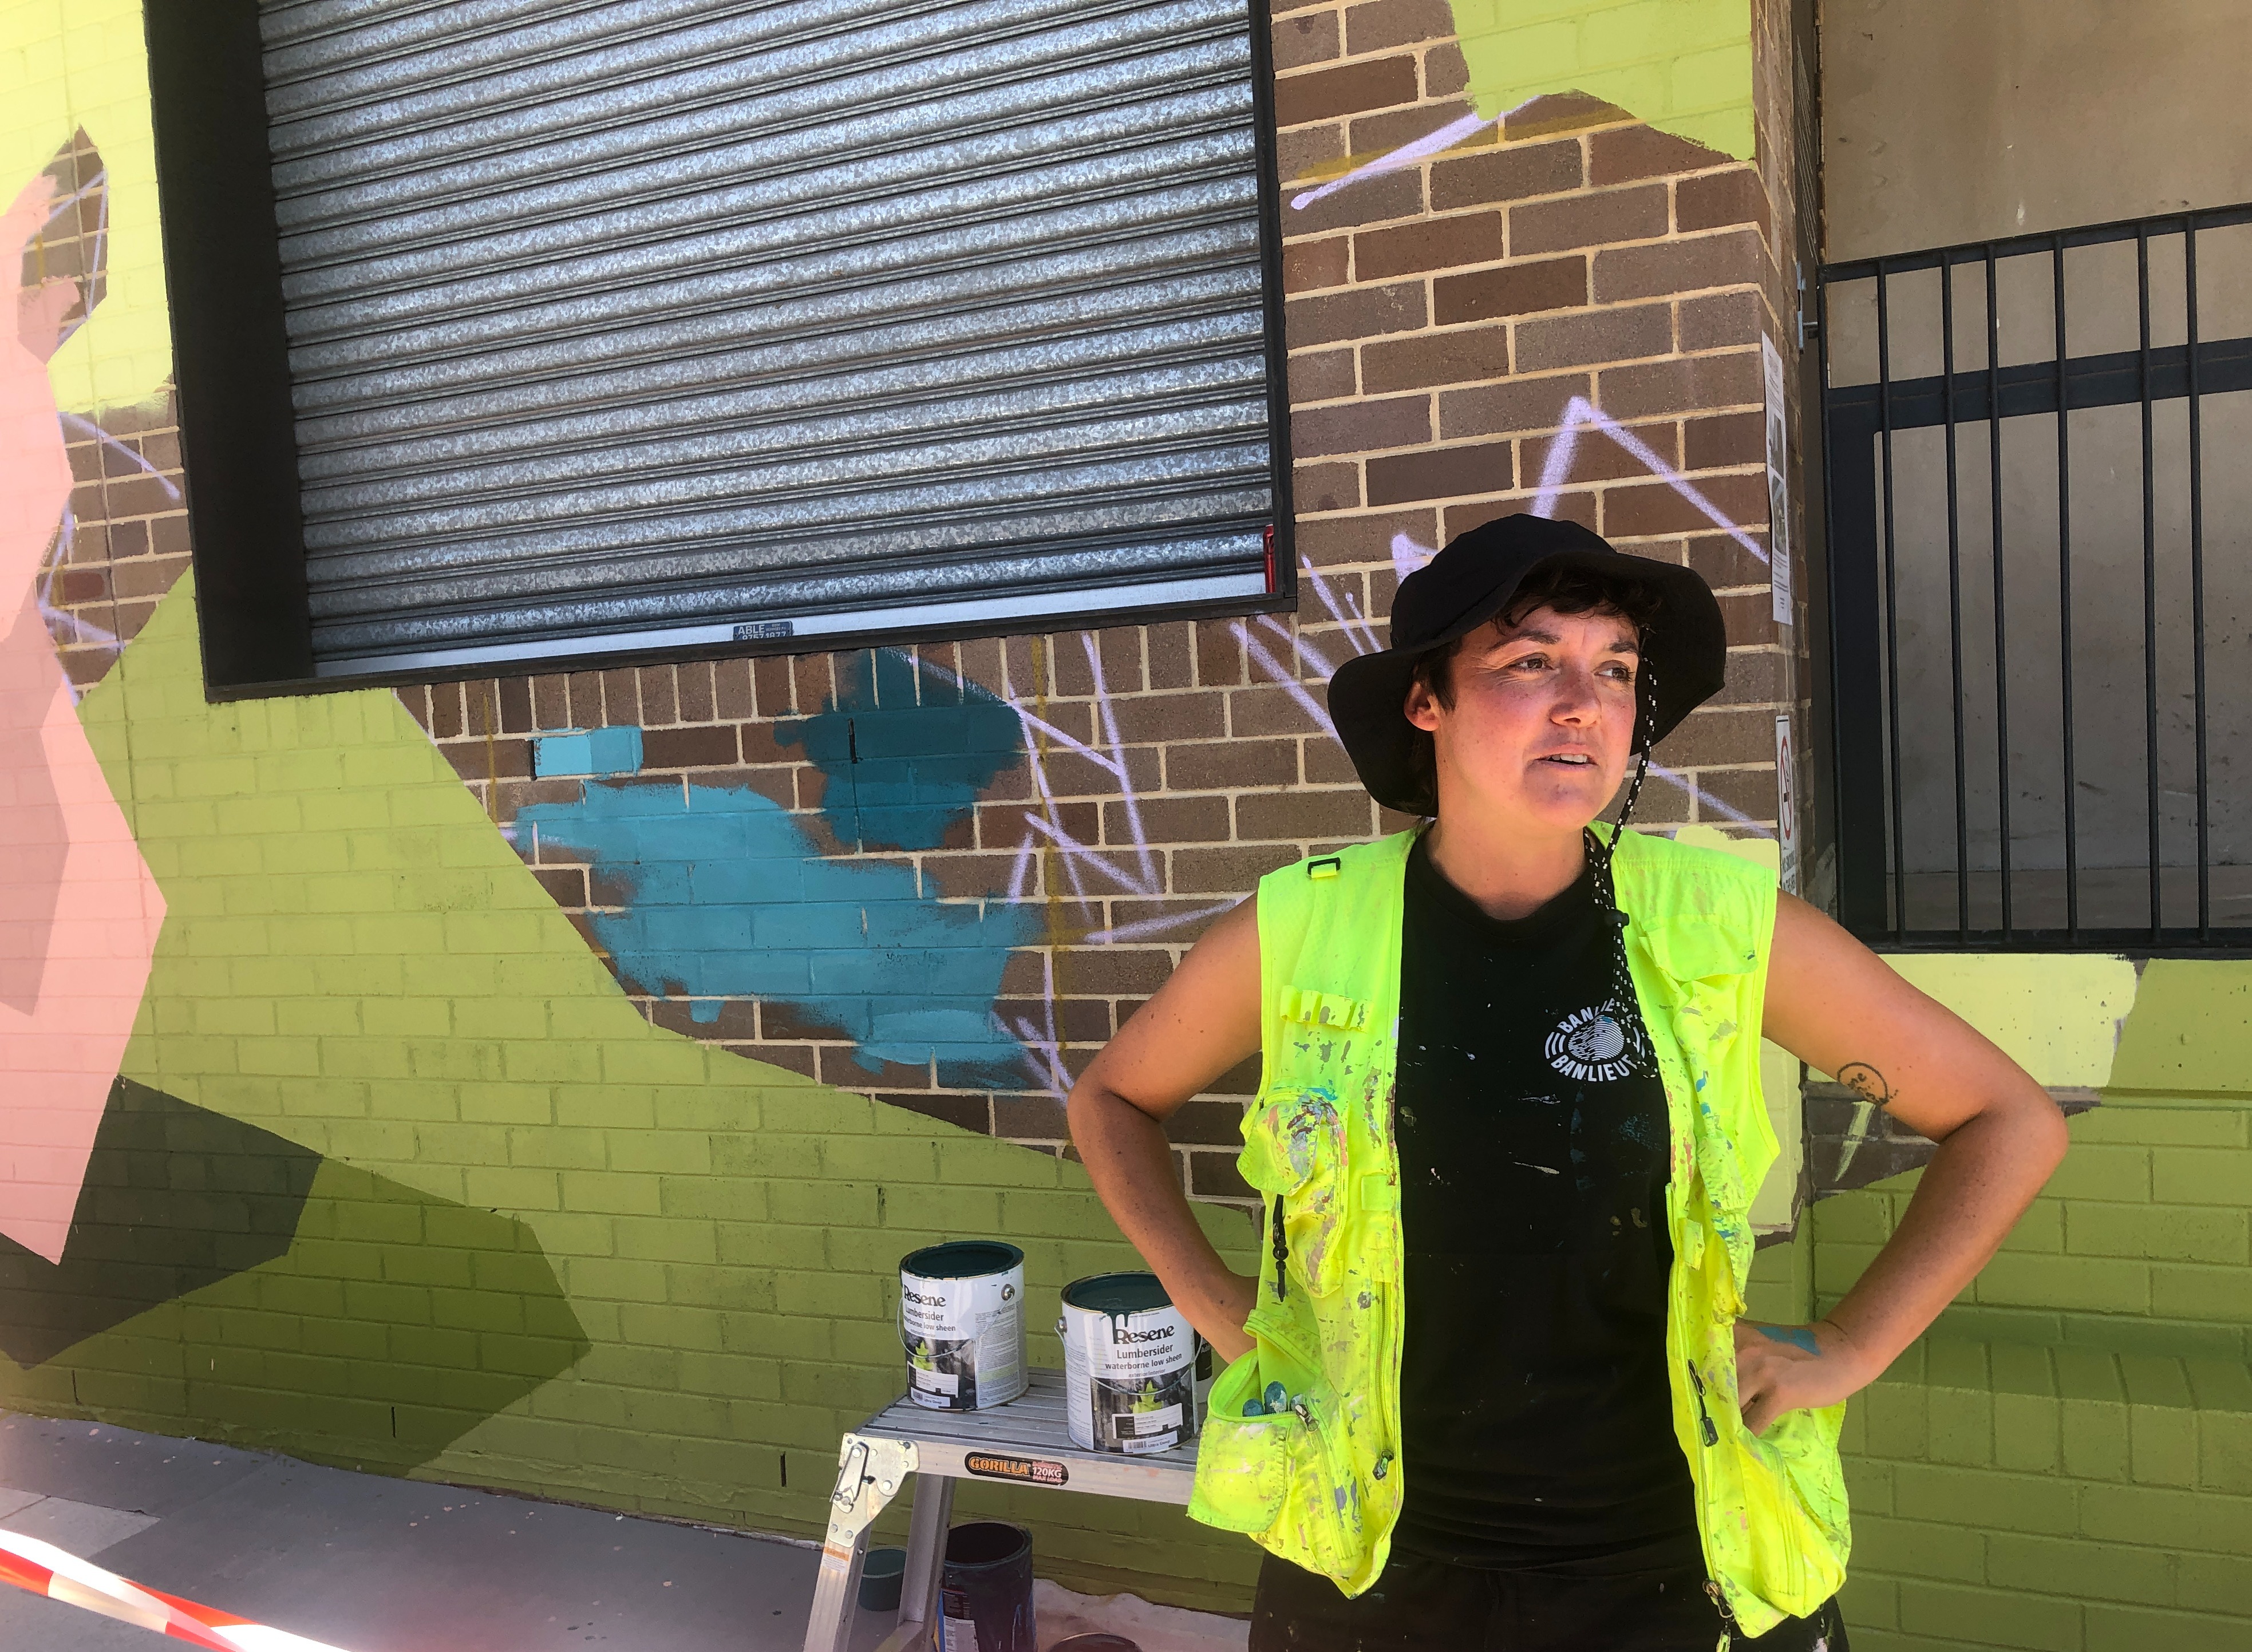 Woman in a high vis vest covered in multi-coloured paid stand in from out a large mural of geometric shaped painted in green, earthy tones